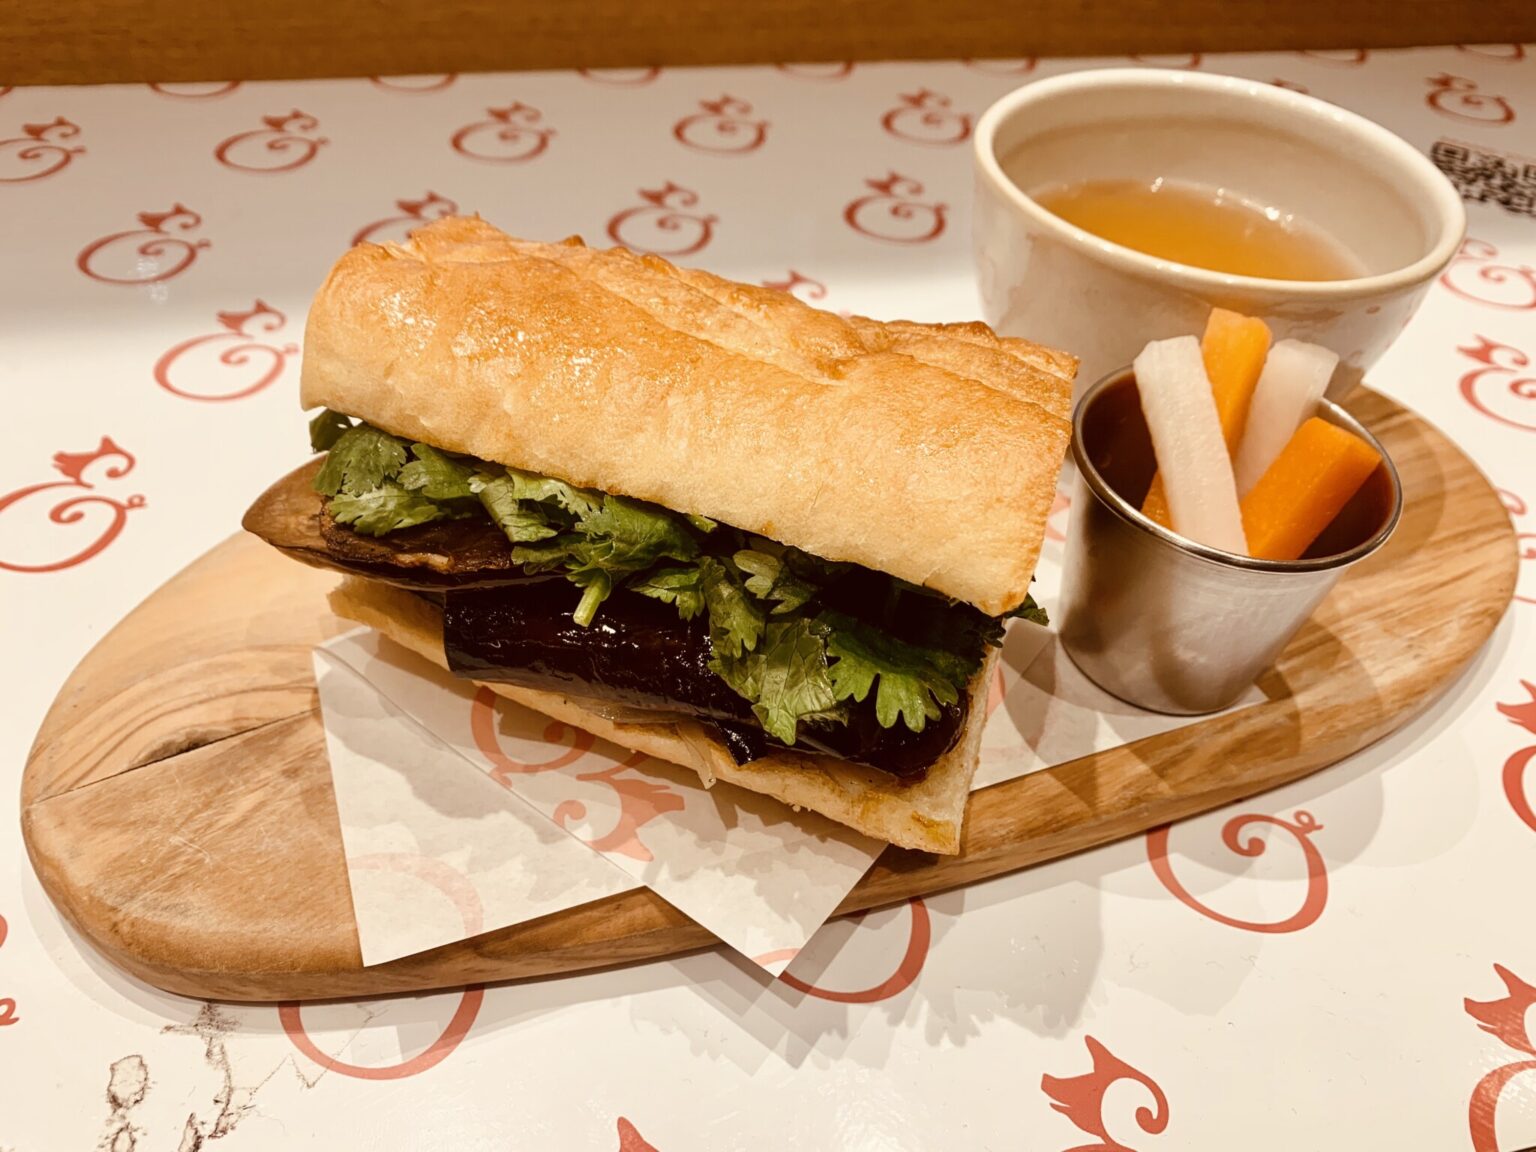 「THE VEGETABLE PHO FRENCH DIP」。フォーのスープは野菜で出汁をとっています。